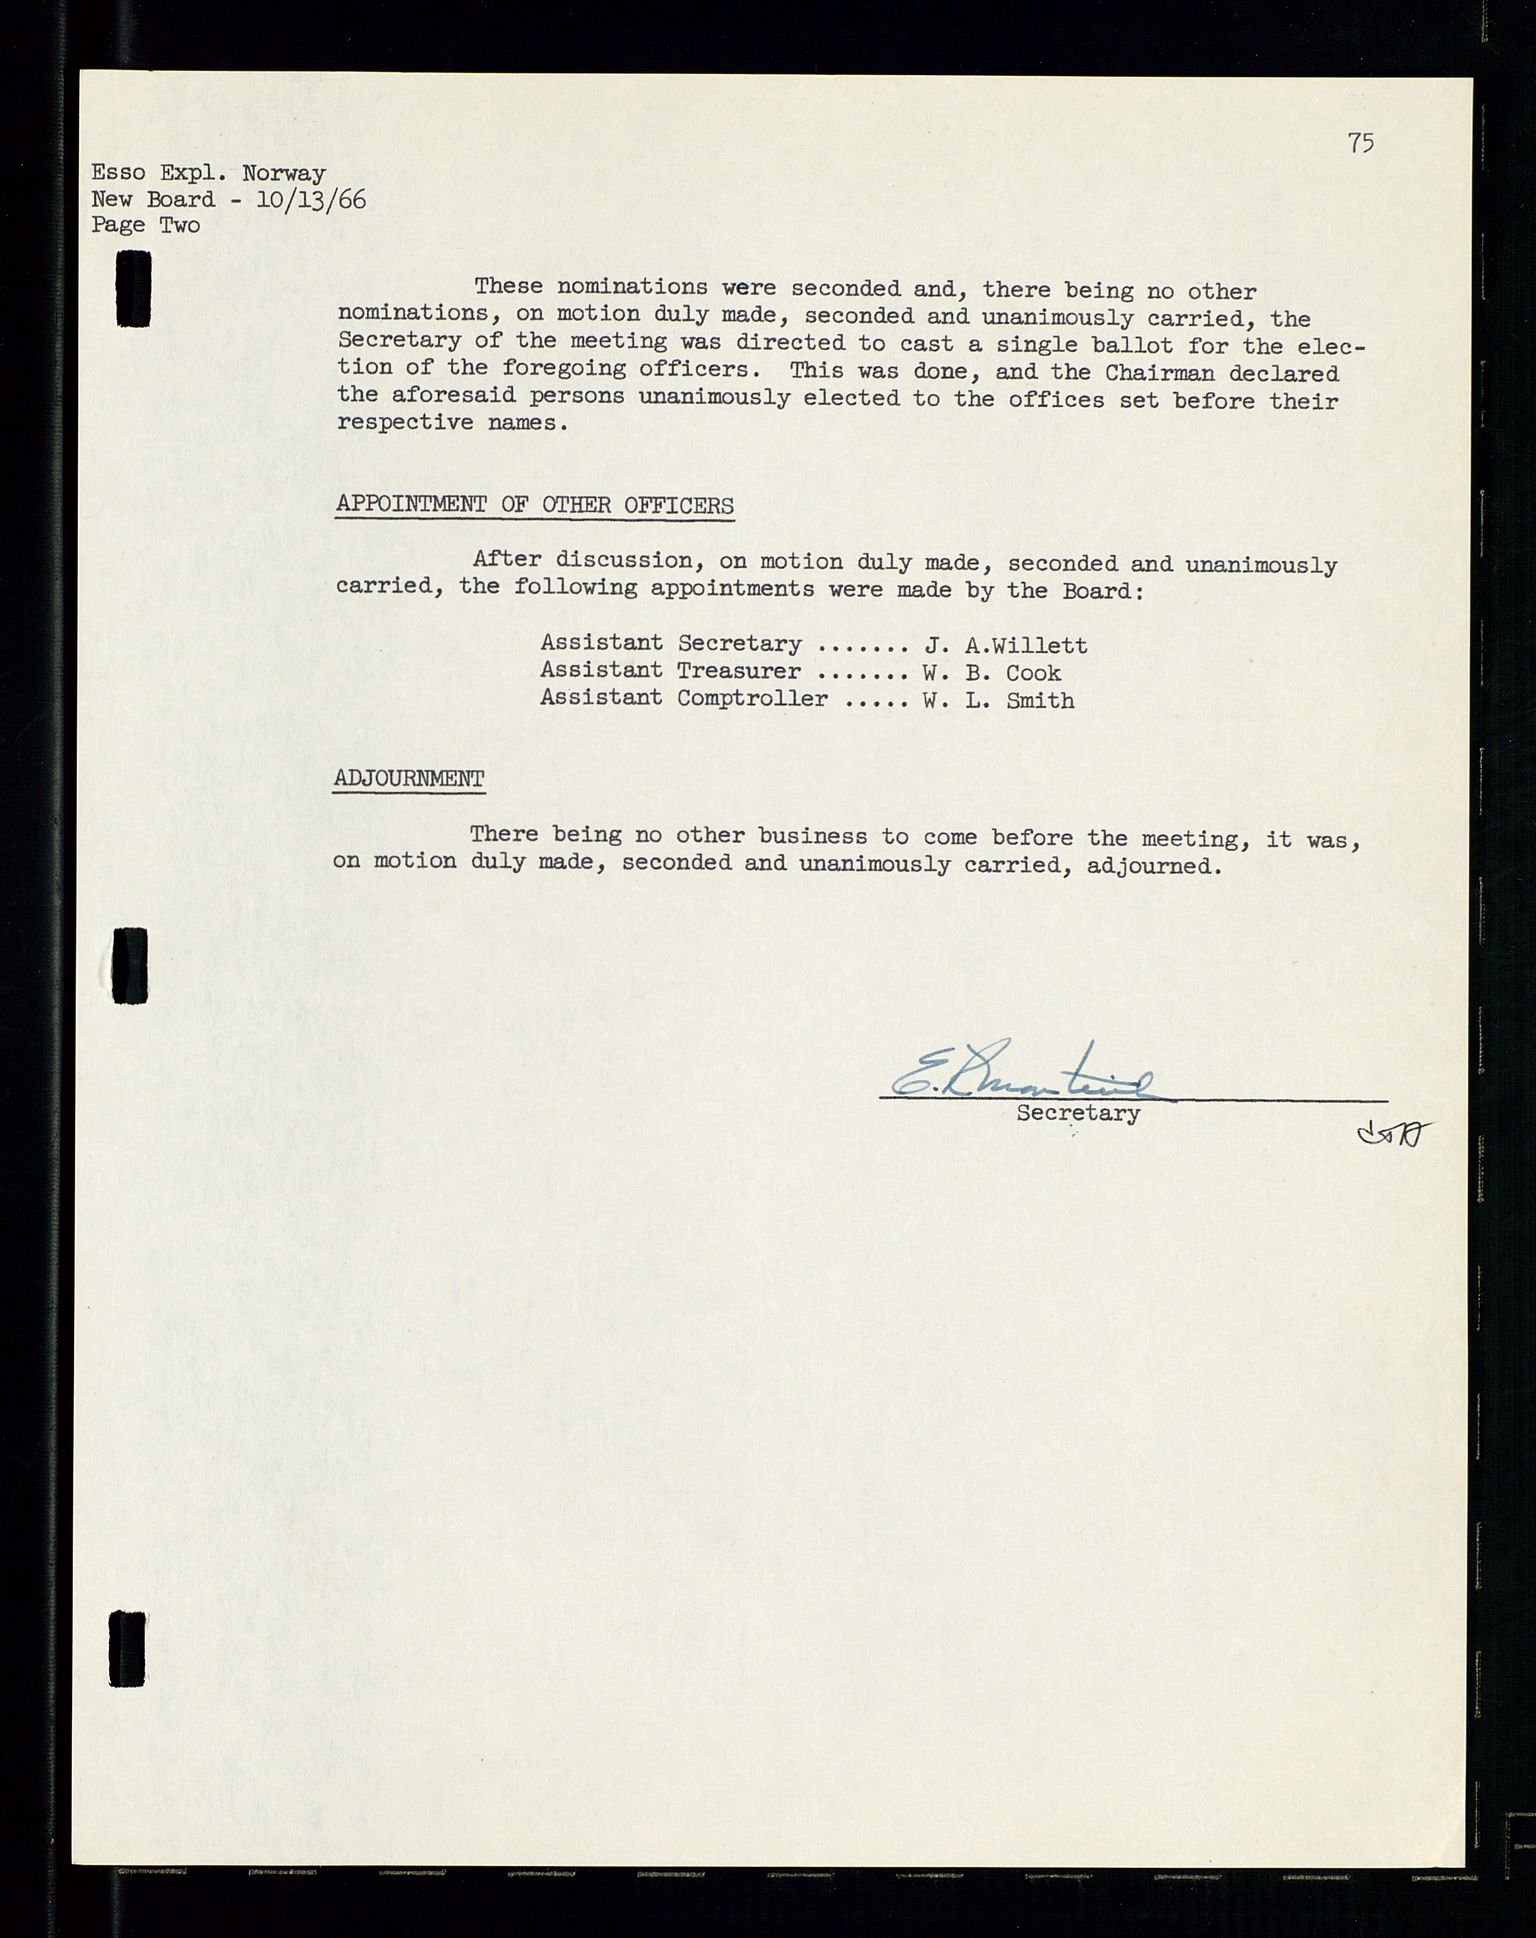 Pa 1512 - Esso Exploration and Production Norway Inc., SAST/A-101917/A/Aa/L0001/0001: Styredokumenter / Corporate records, By-Laws, Board meeting minutes, Incorporations, 1965-1975, p. 75